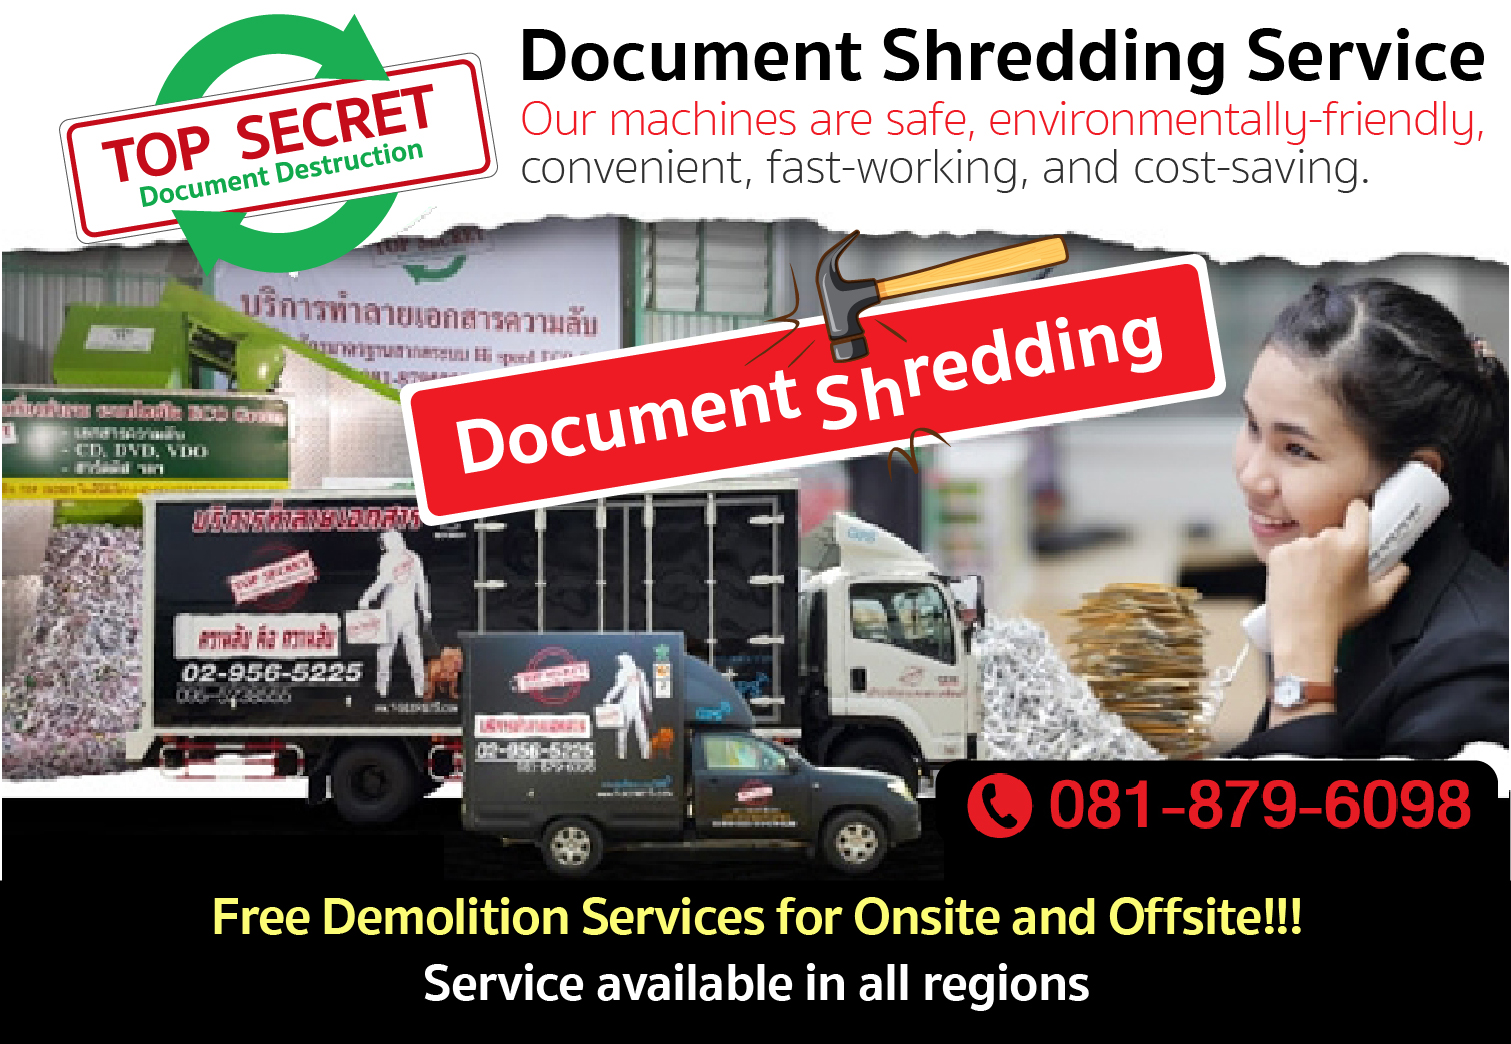 Document Shredding Service Our machines are safe, environmentally-friendly with state-of-the-art technology, convenient, fast-working, and cost-saving.